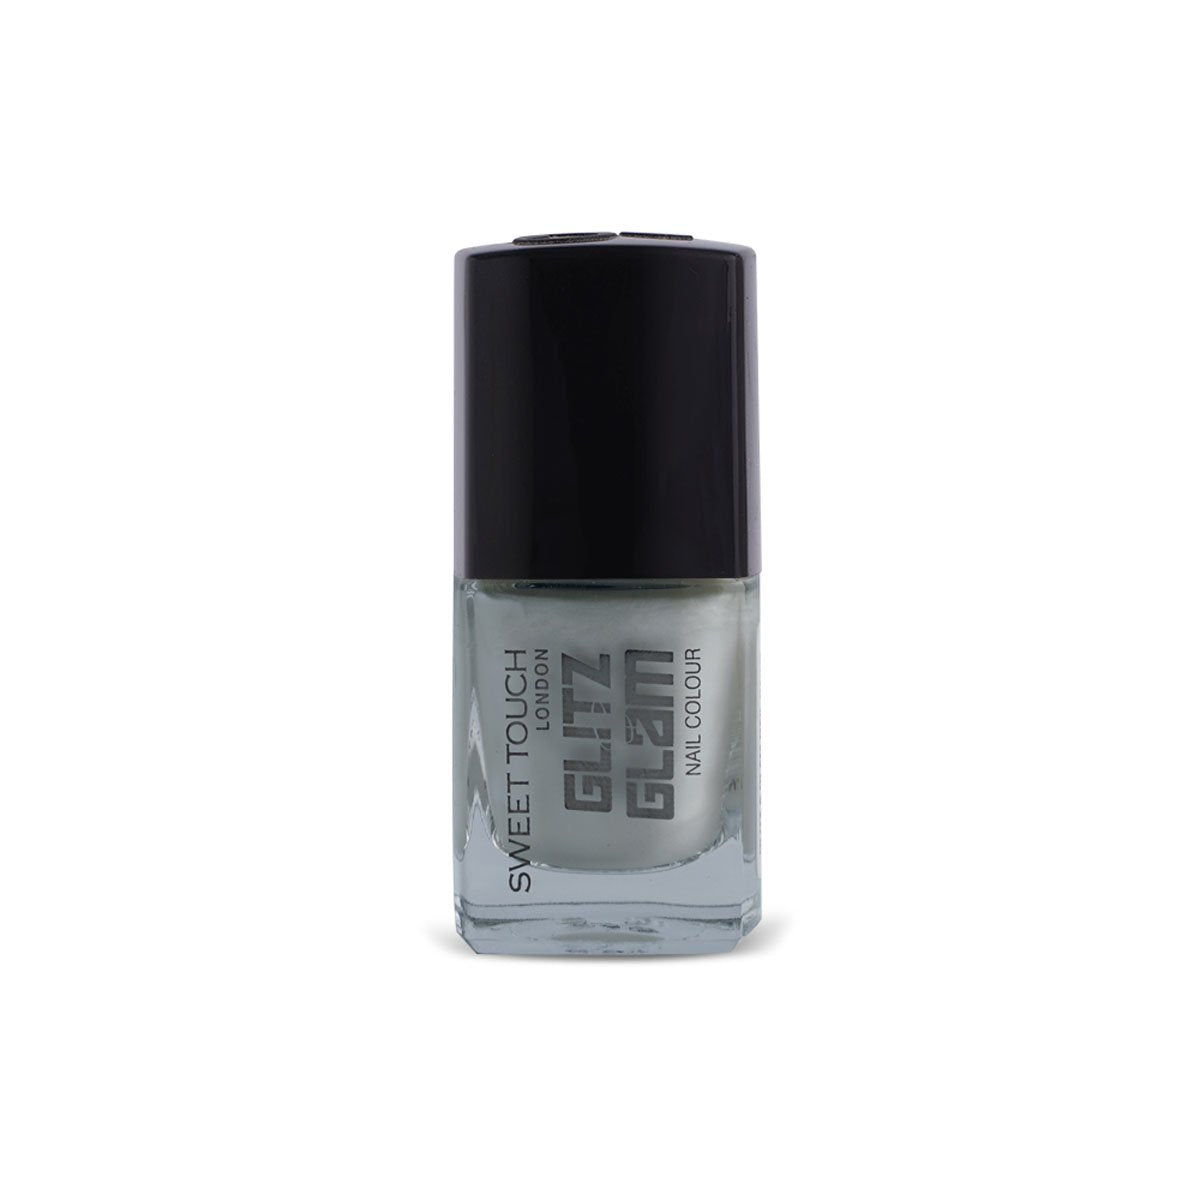 St London - Glitz & Glam Nail Paint - St272 - Ice Queen